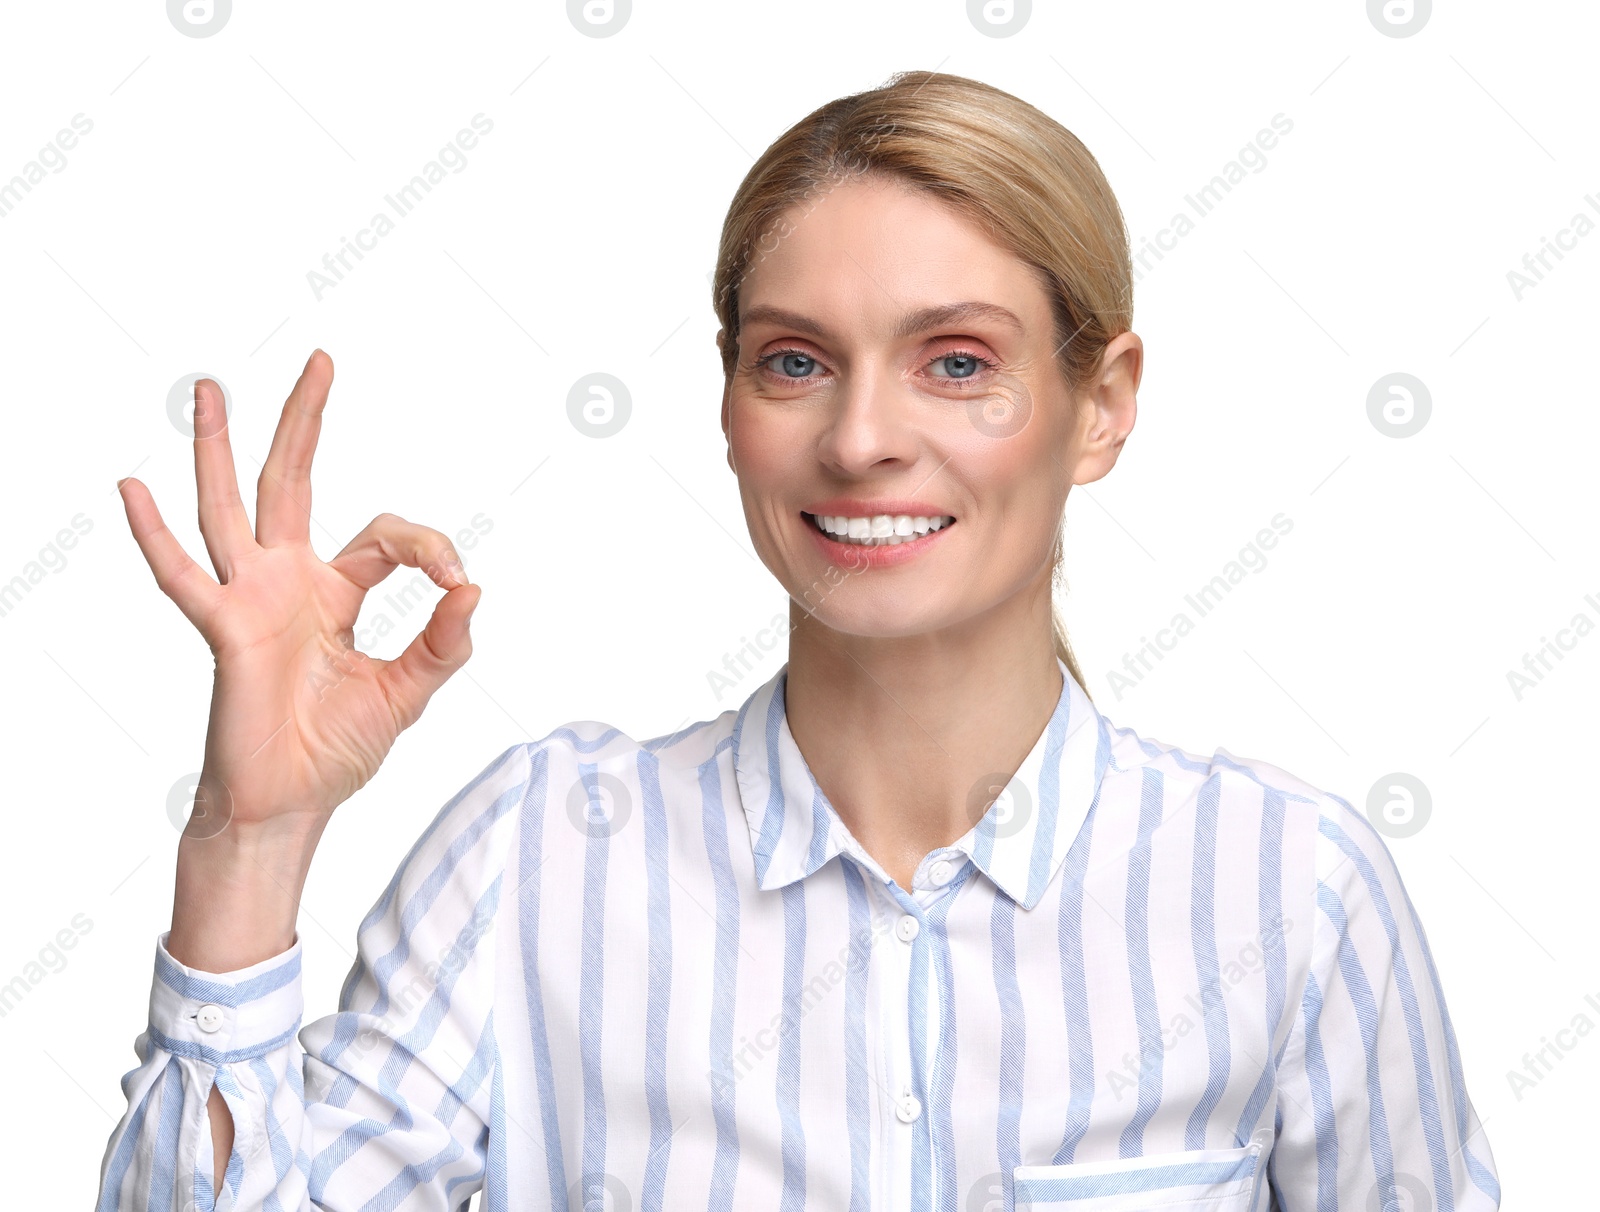 Photo of Woman with clean teeth smiling and showing OK gesture on white background